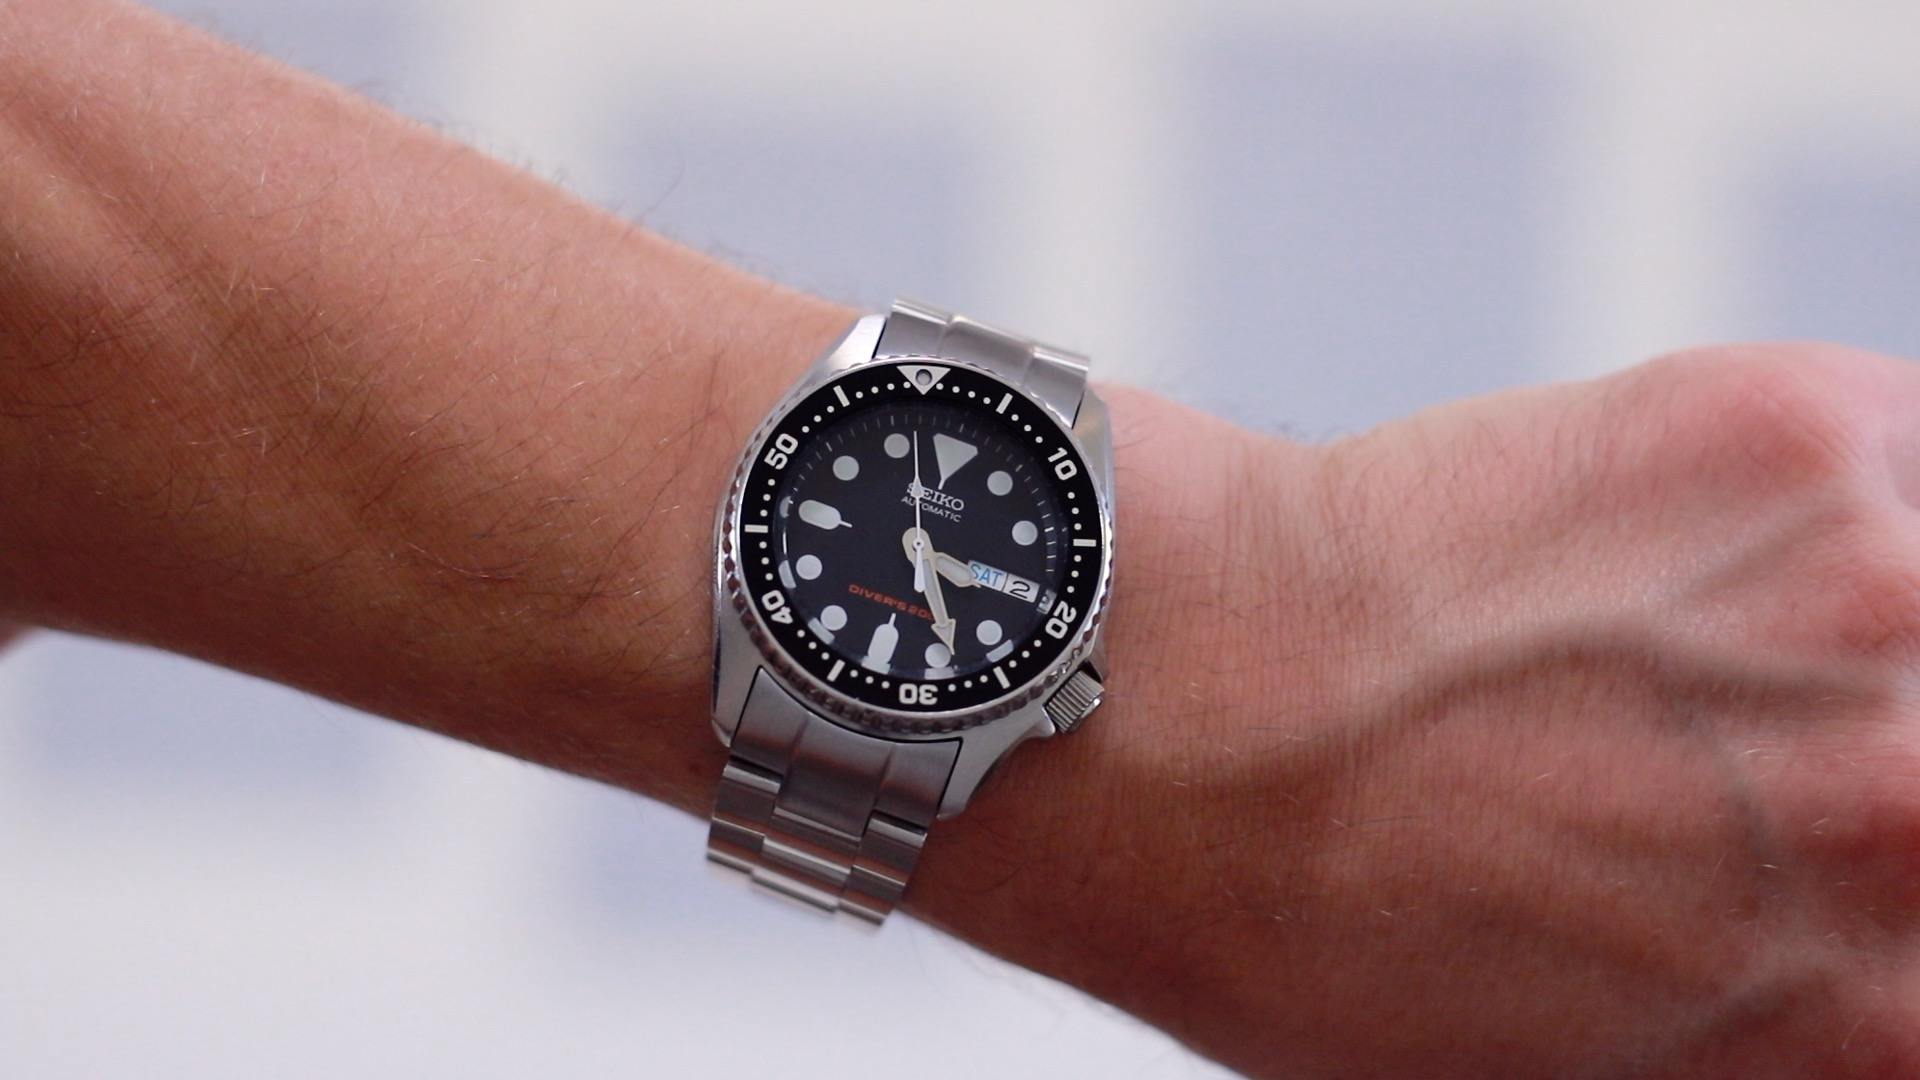 Seiko SKX013 Review: The Best Small Dive Watch?